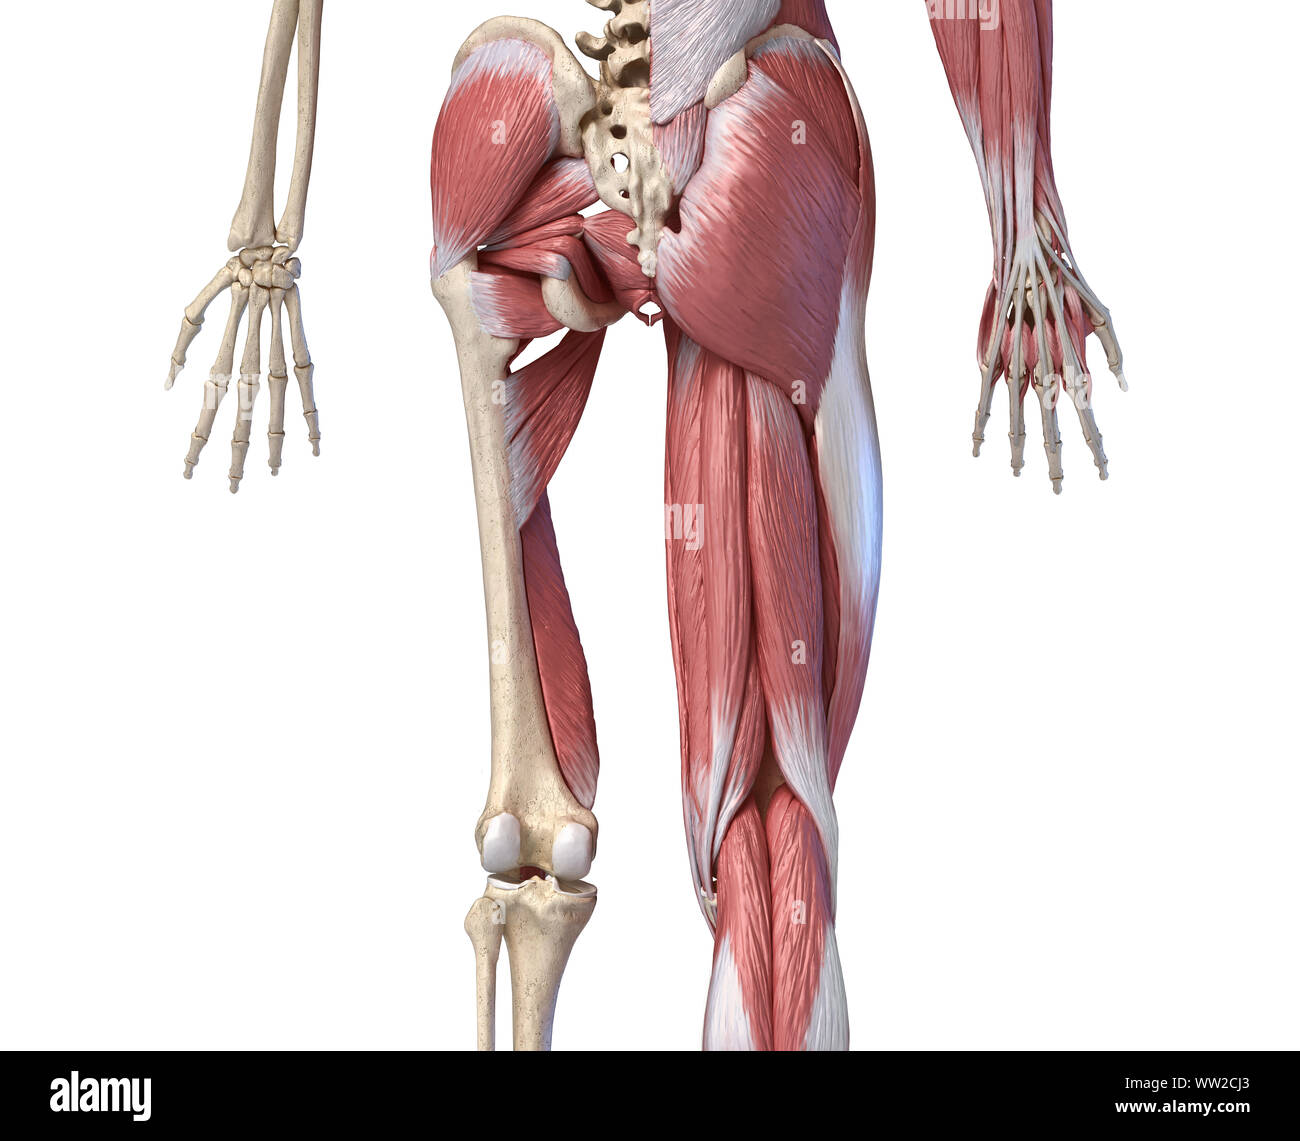 Human male anatomy, limbs and hip muscular and skeletal systems, with internal muscle layers. Back view. on white background. 3d anatomy illustration. Stock Photo